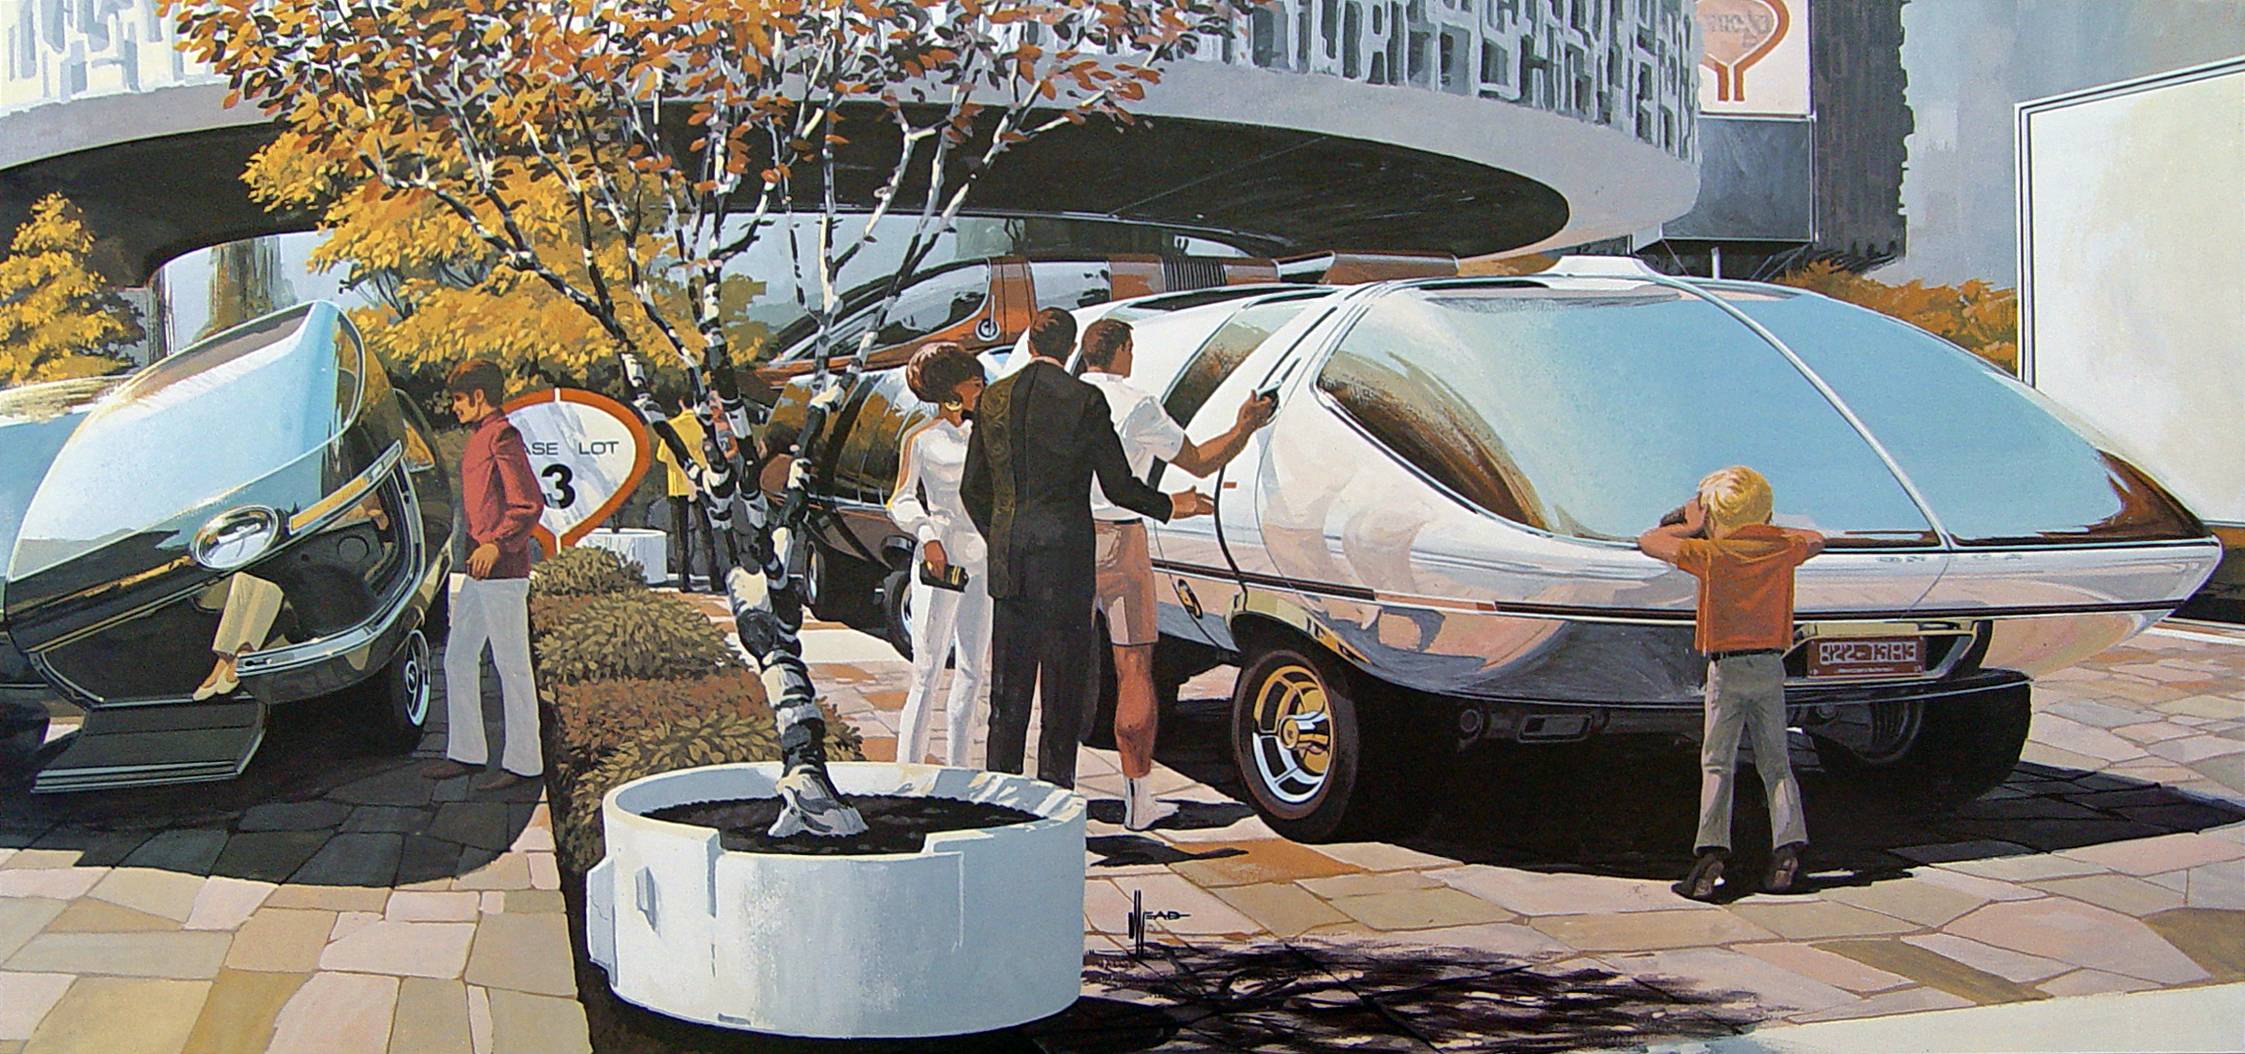 When Will Las Vegas Finally Look Like This Futuristic Illustration From The ’80s?